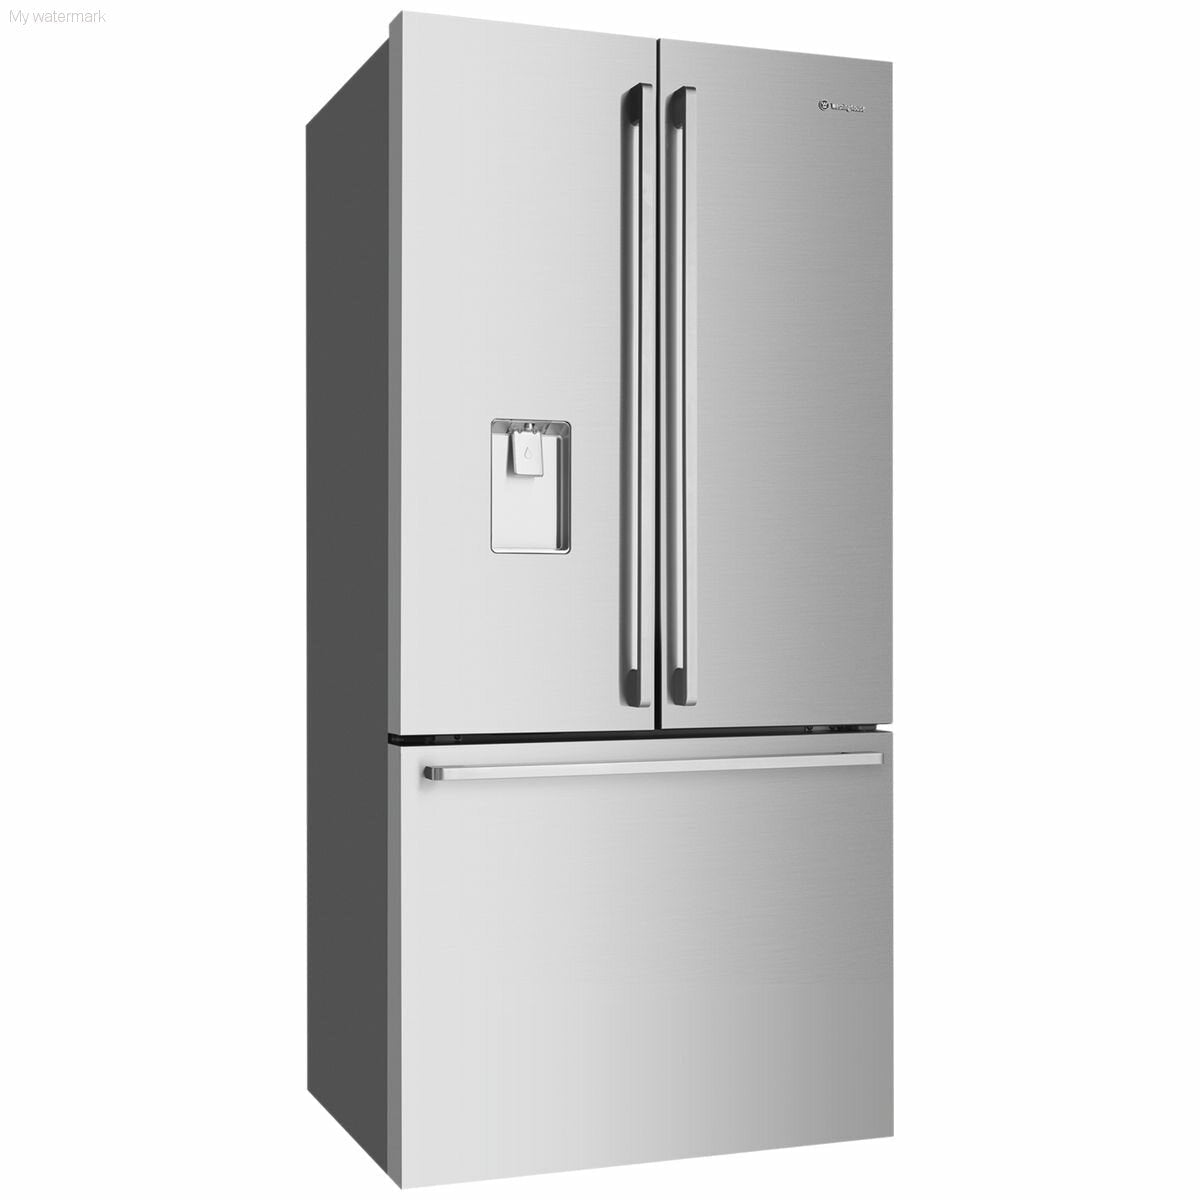 Westinghouse 491L French Door Fridge with Ice and Water